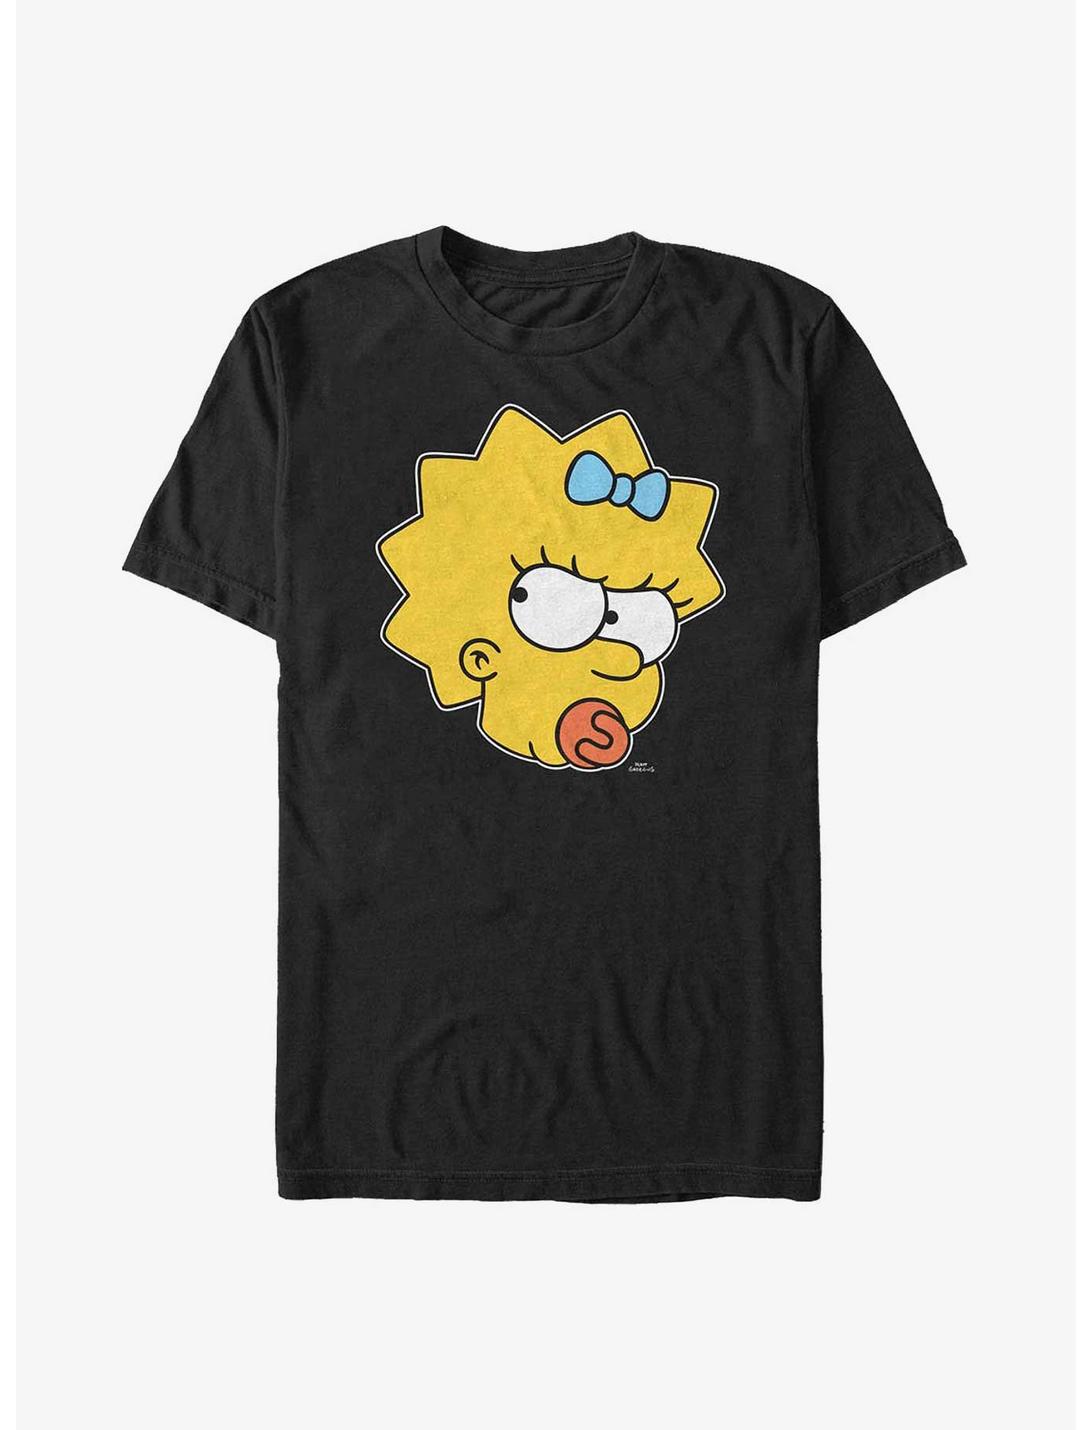 The Simpsons Sassy Maggie Face Image T-Shirt, BLACK, hi-res